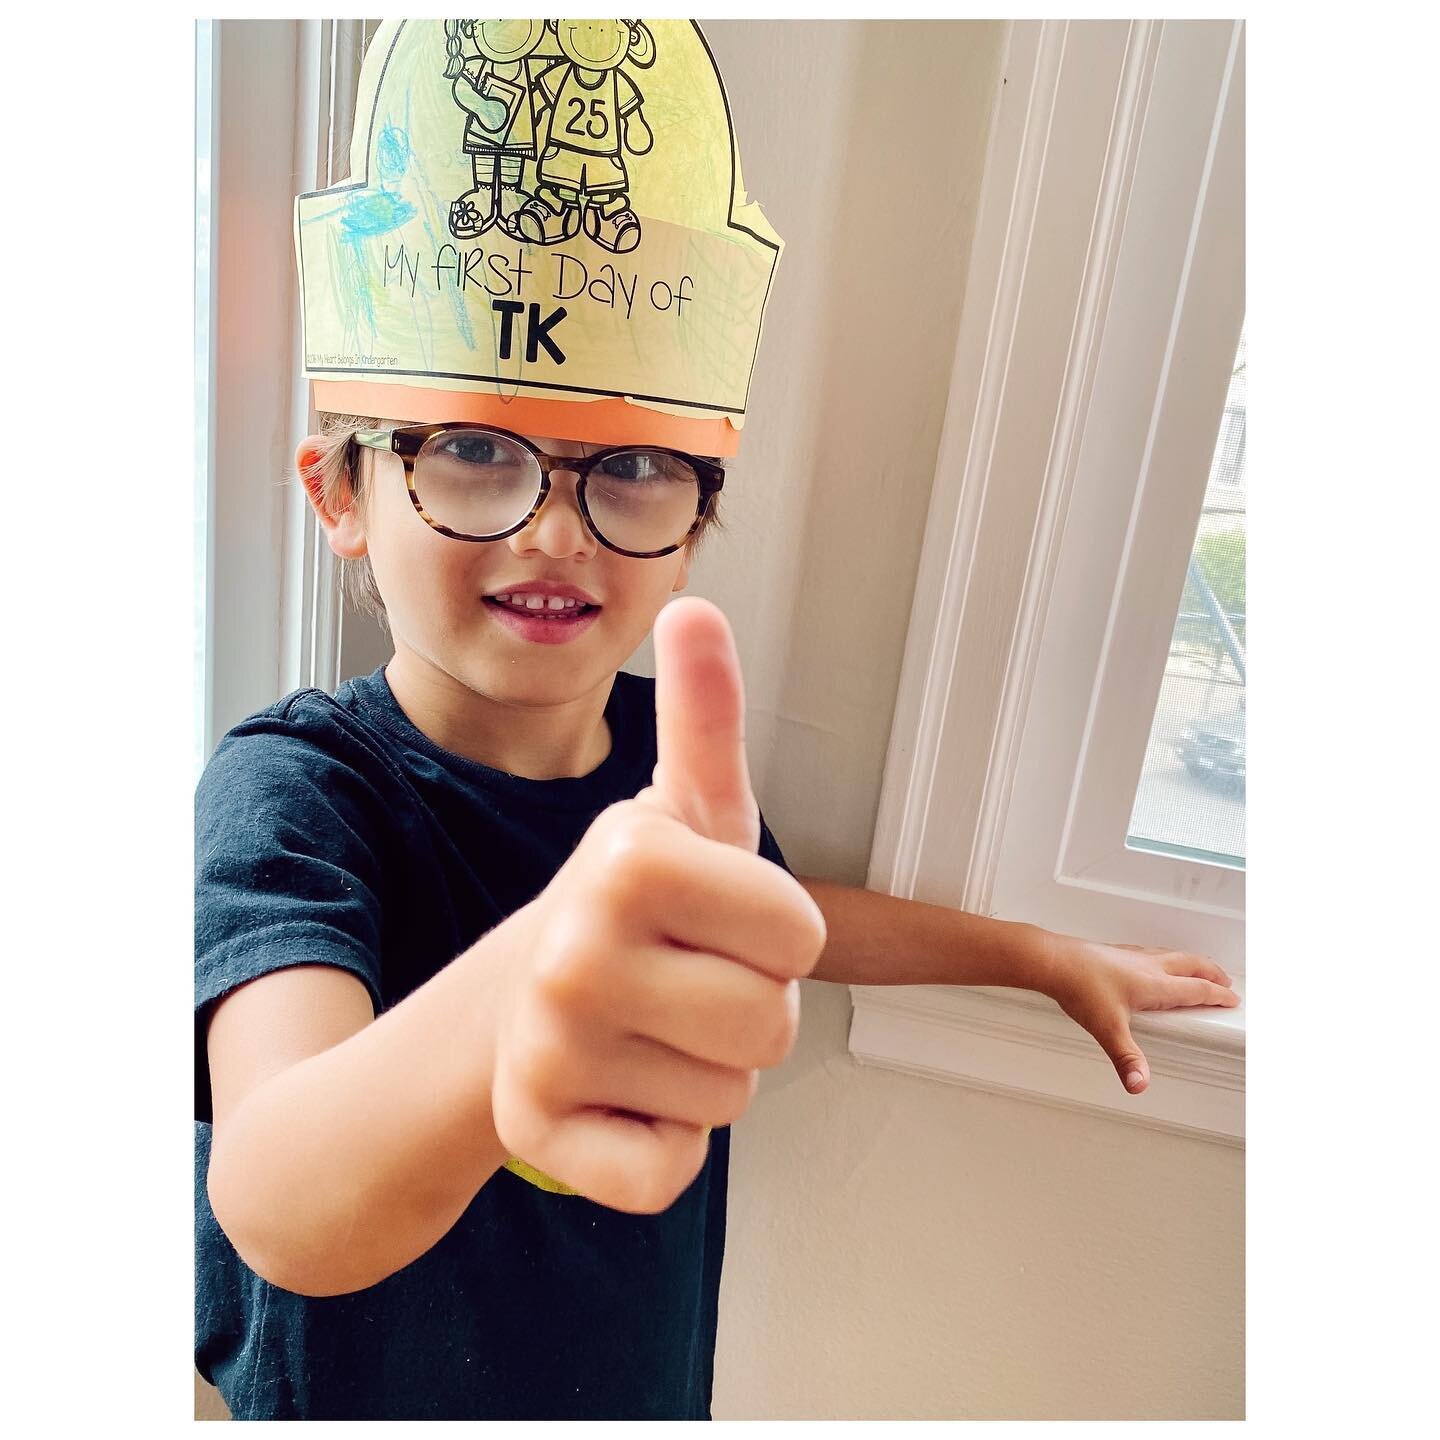 Annnnd first day of TK for our Jack, who is thrilled to finally have &ldquo;assignments&rdquo; like his big sisters. (Wonder how long that&rsquo;ll last! ;). Swipe for his first school assignment. 😍❤️